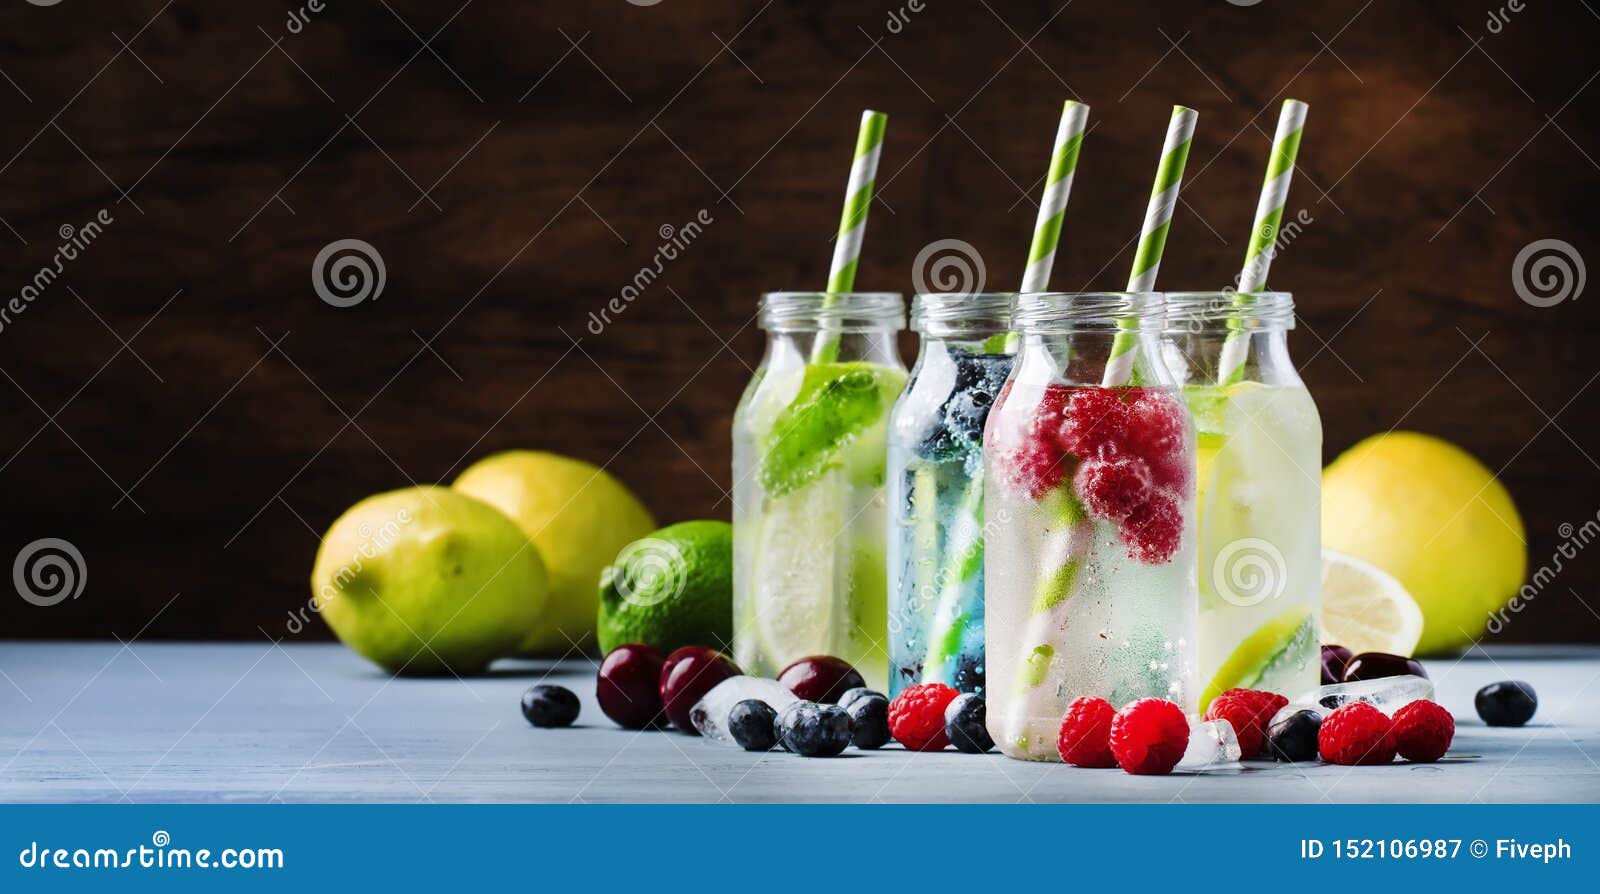 summer drinks set. berry, fruit and citrus non-alcoholic refreshing ice cold beverages and cocktails in glass bottles on blue